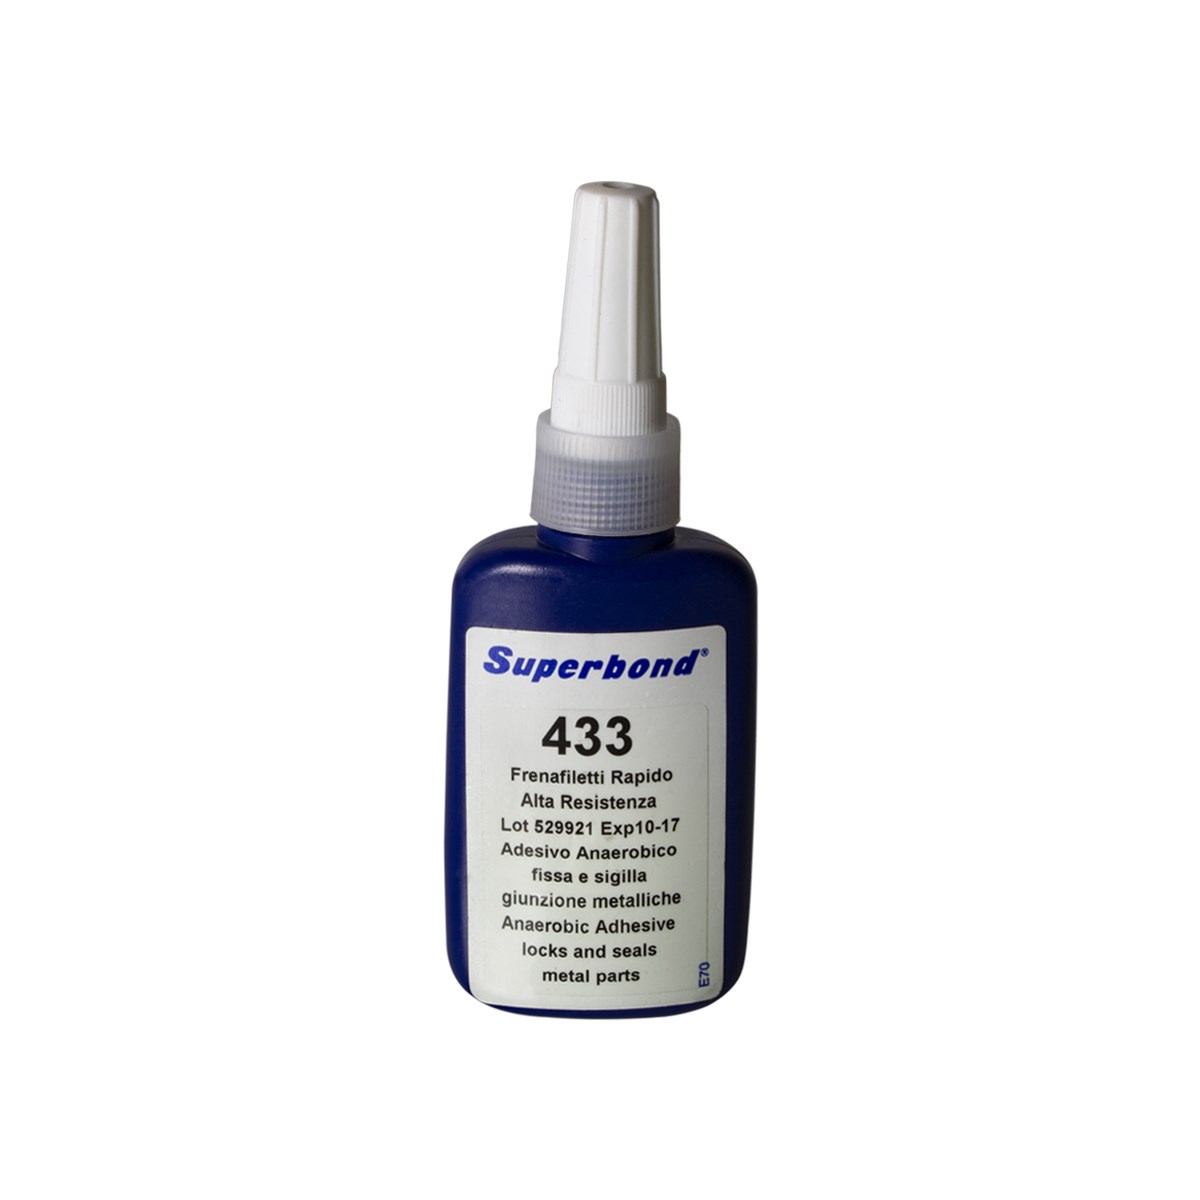 Special glue or components cod. 214, 216, 217, 218